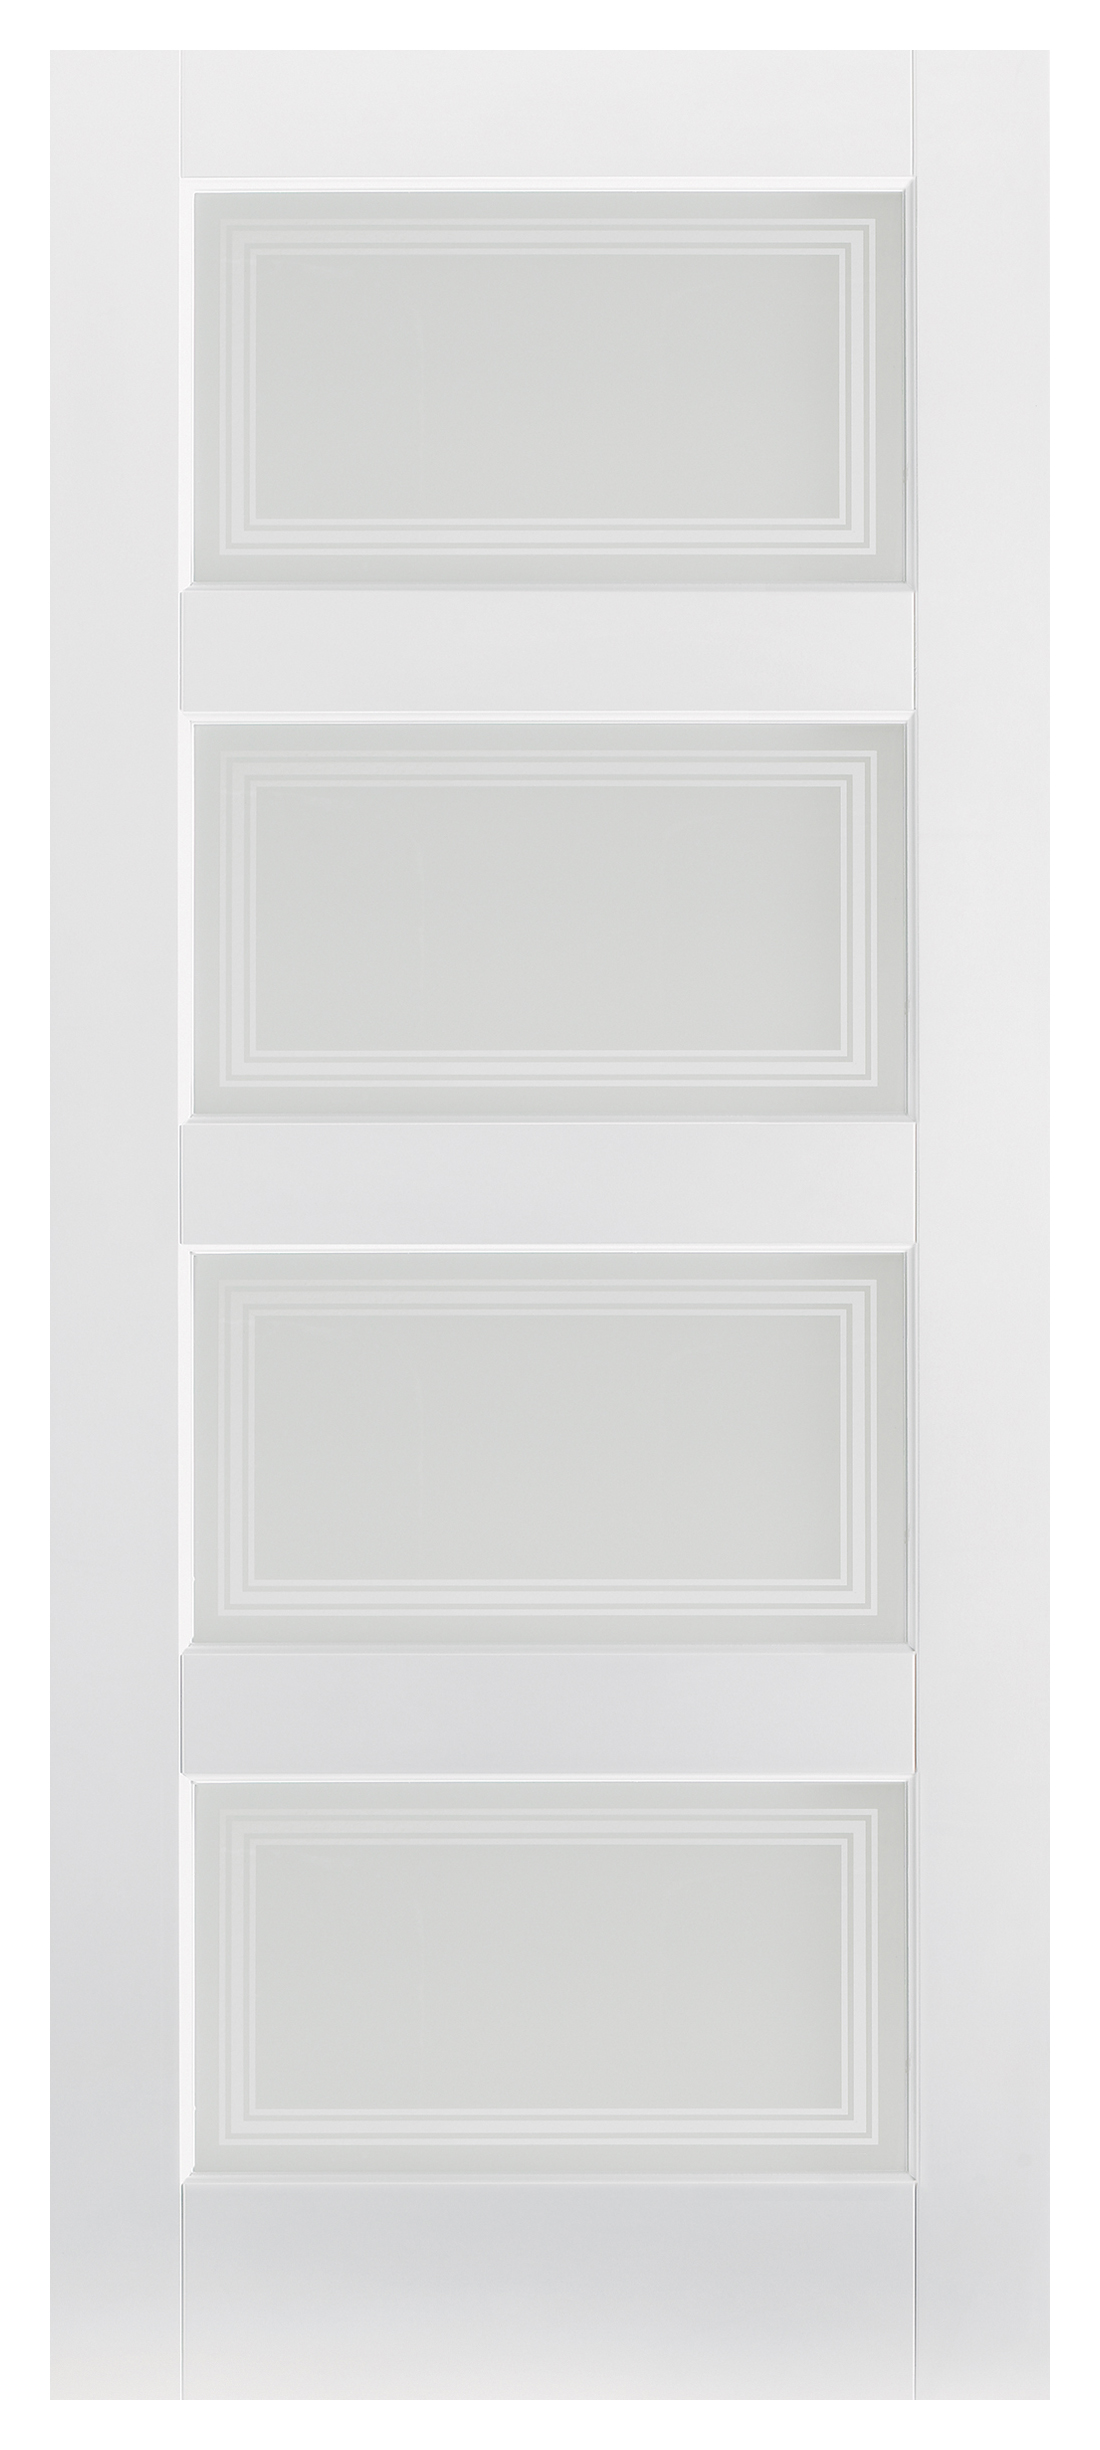 Image of LPD Internal Contemporary 4 Lite Primed White Solid Core Door - 686 x 1981mm